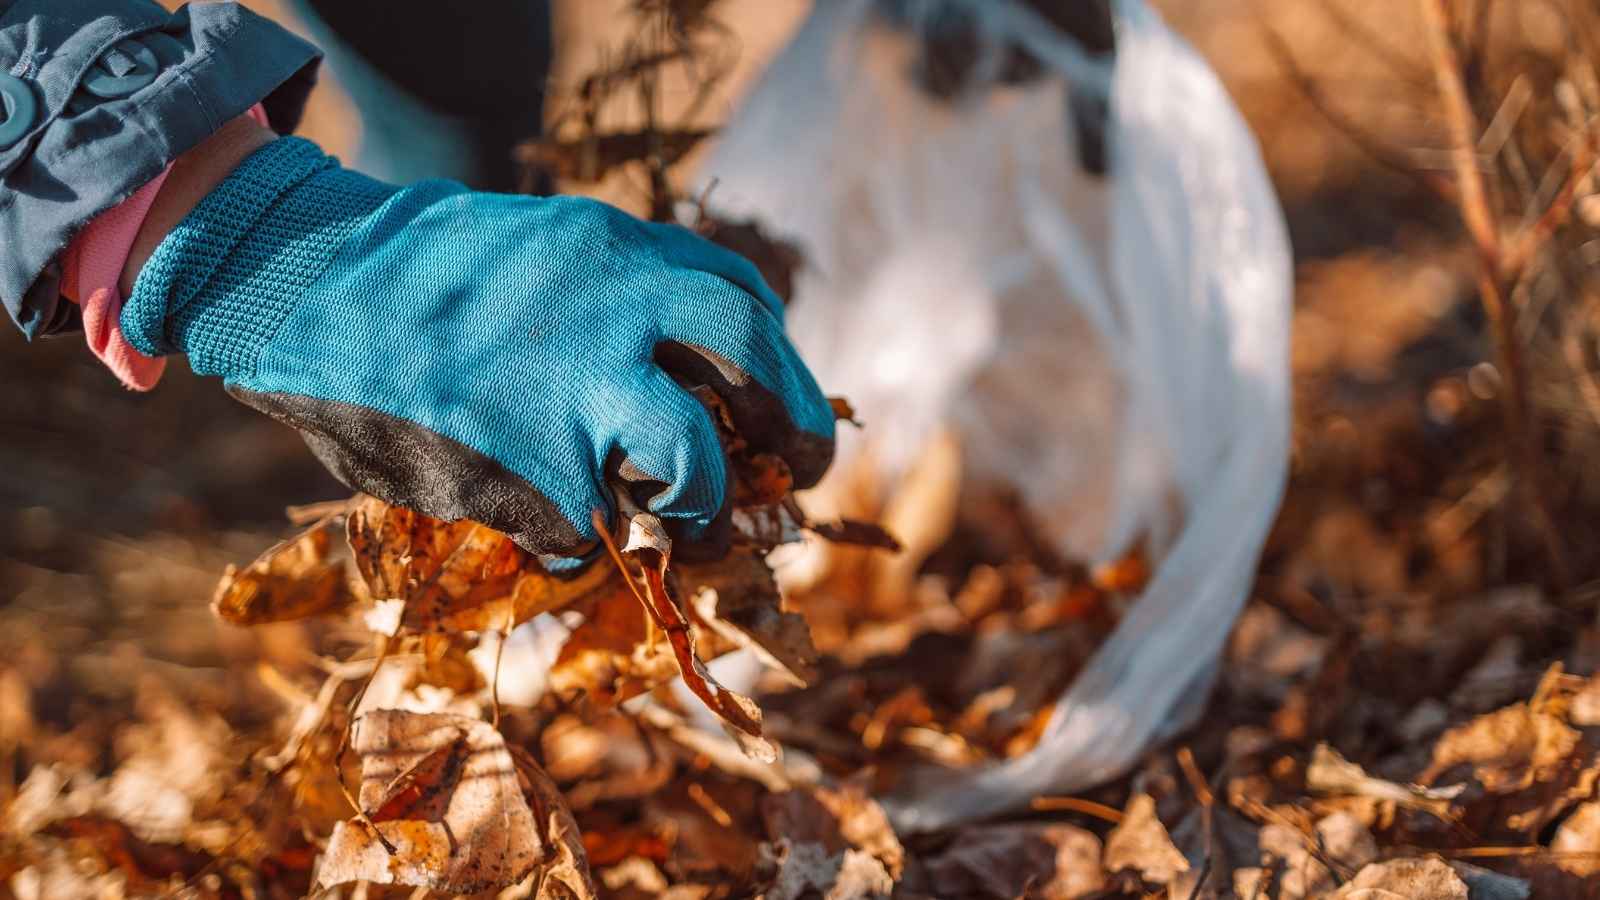 A gloved hand picks up leaves from the ground.